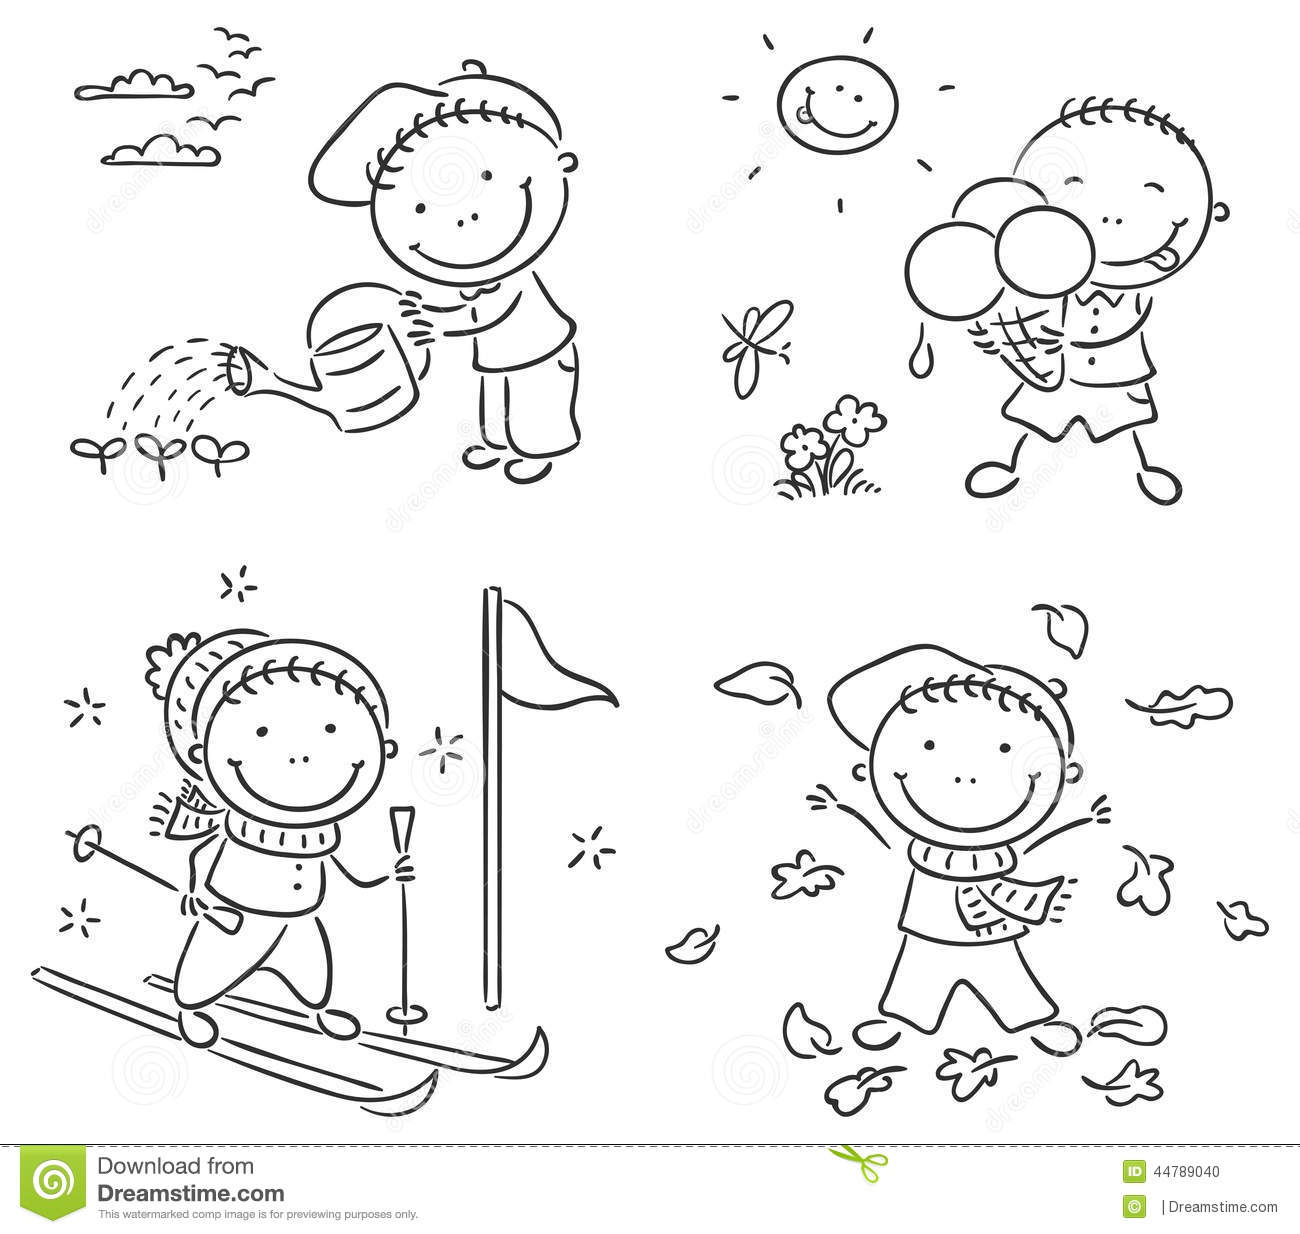 Seasons coloring pages.